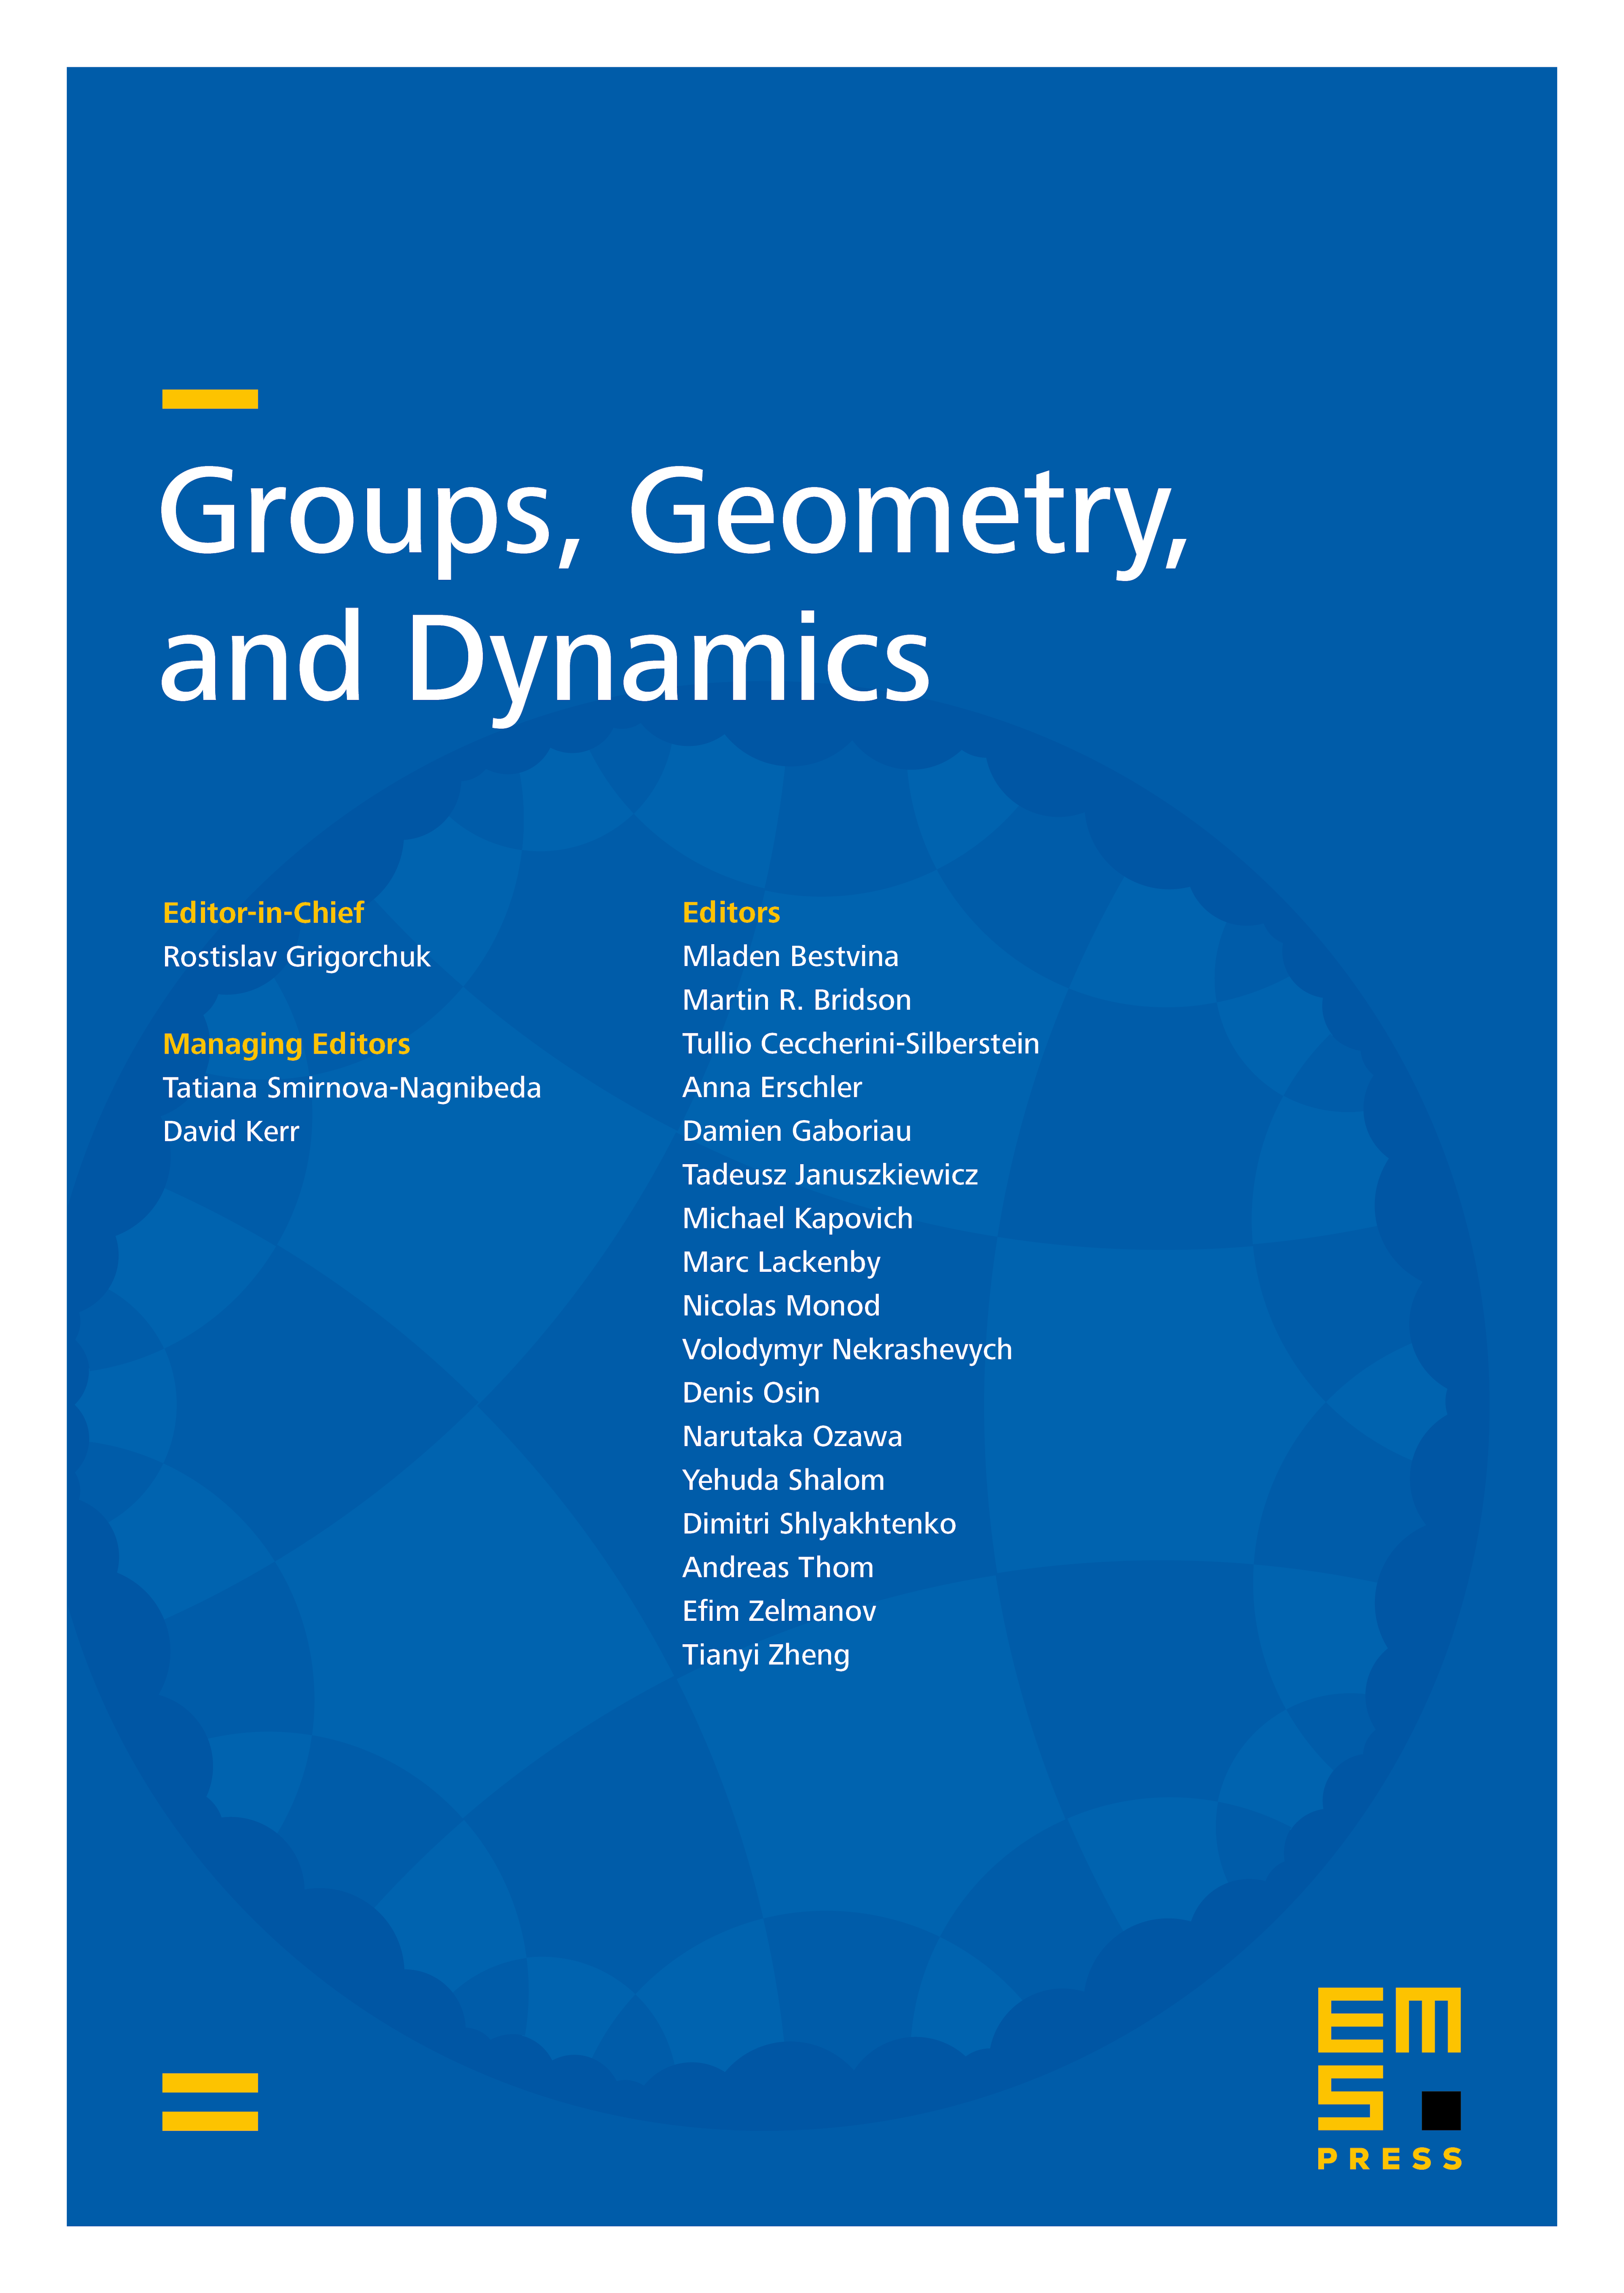 Growth conditions in infinitely generated groups cover